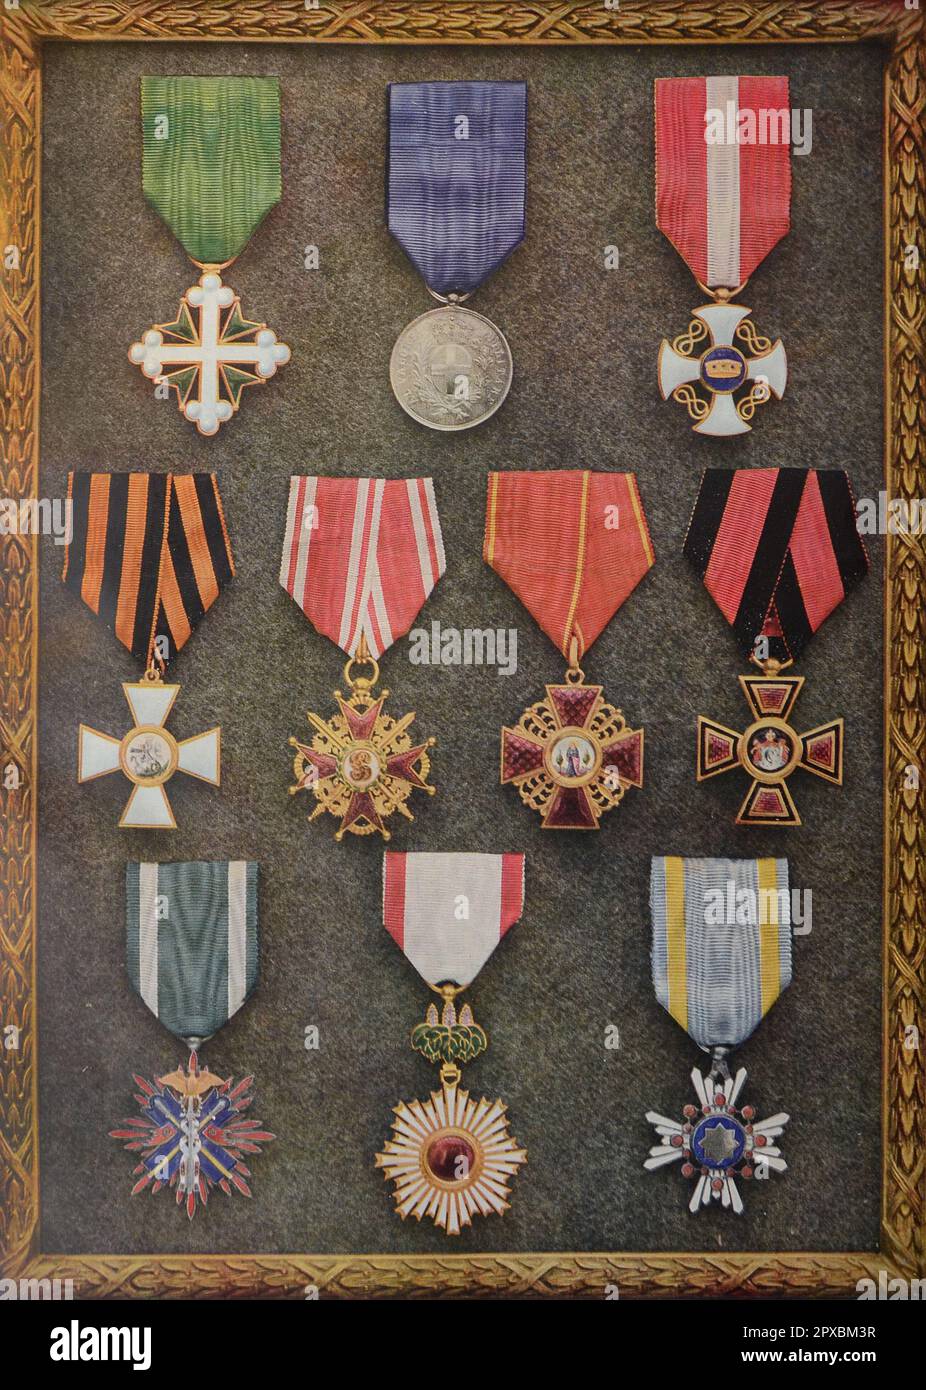 World War I. War decorations. Italy - Russia - Japan From Left to right (at the top), Italy: Order of Saints Maurice and Lazarus; medal of military valor; Order of the Crown of Italy. - (in the middle), Russia: Order of St. George, officiers (the soldiers' medal has the same ribbon); Order of Saint Stanislaus (House of Romanov); Order of Saint Anna; Order of Saint Vladimir, - (bottom), Japan: Order of the Golden Kite; Order of the Rising Sun; Order of the Sacred Treasure Stock Photo